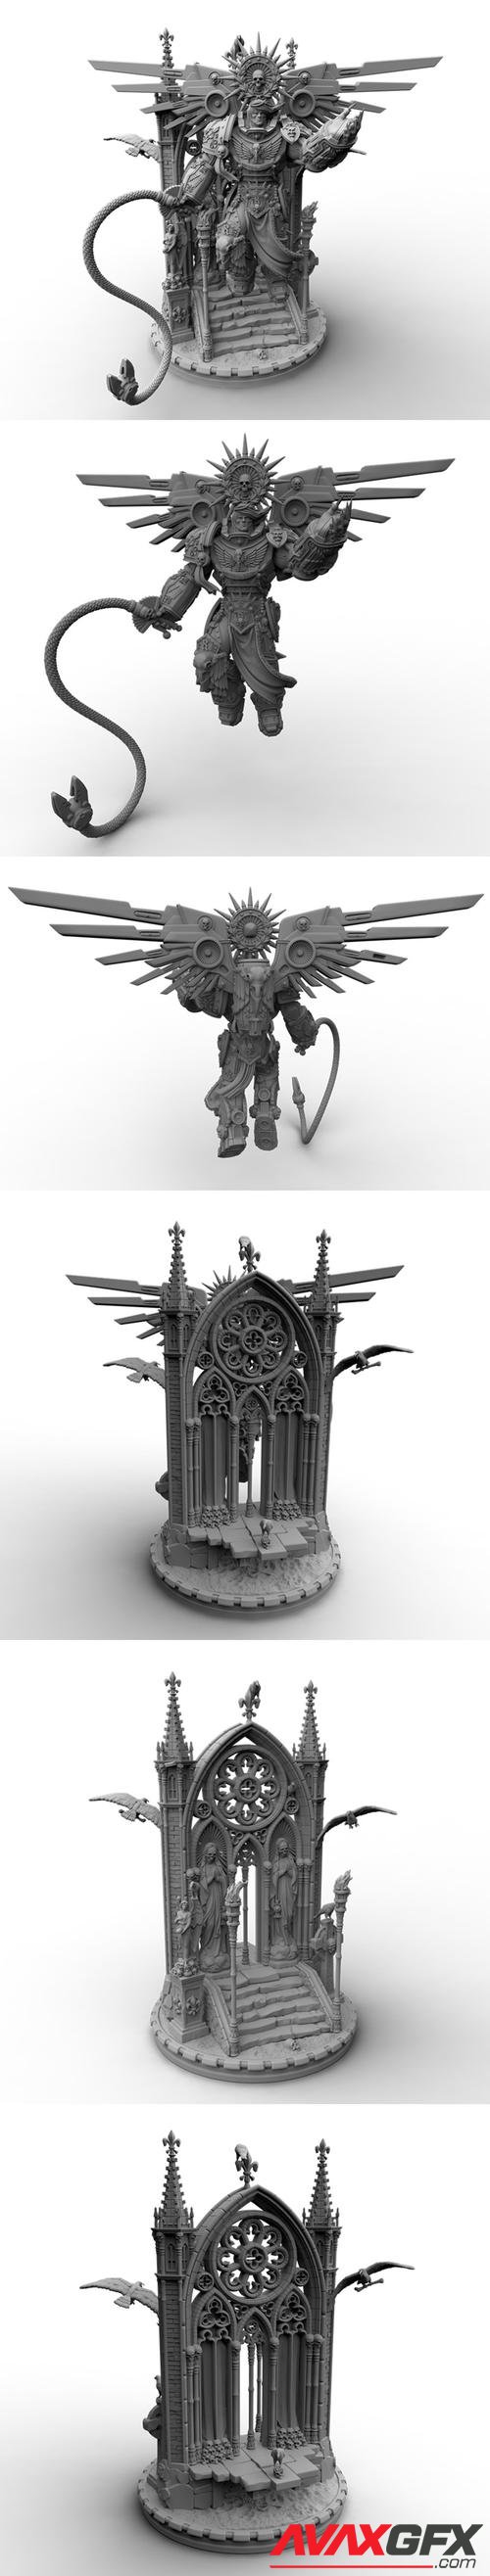 ﻿Heresylab - Lord of Deliverance – 3D Printable STL